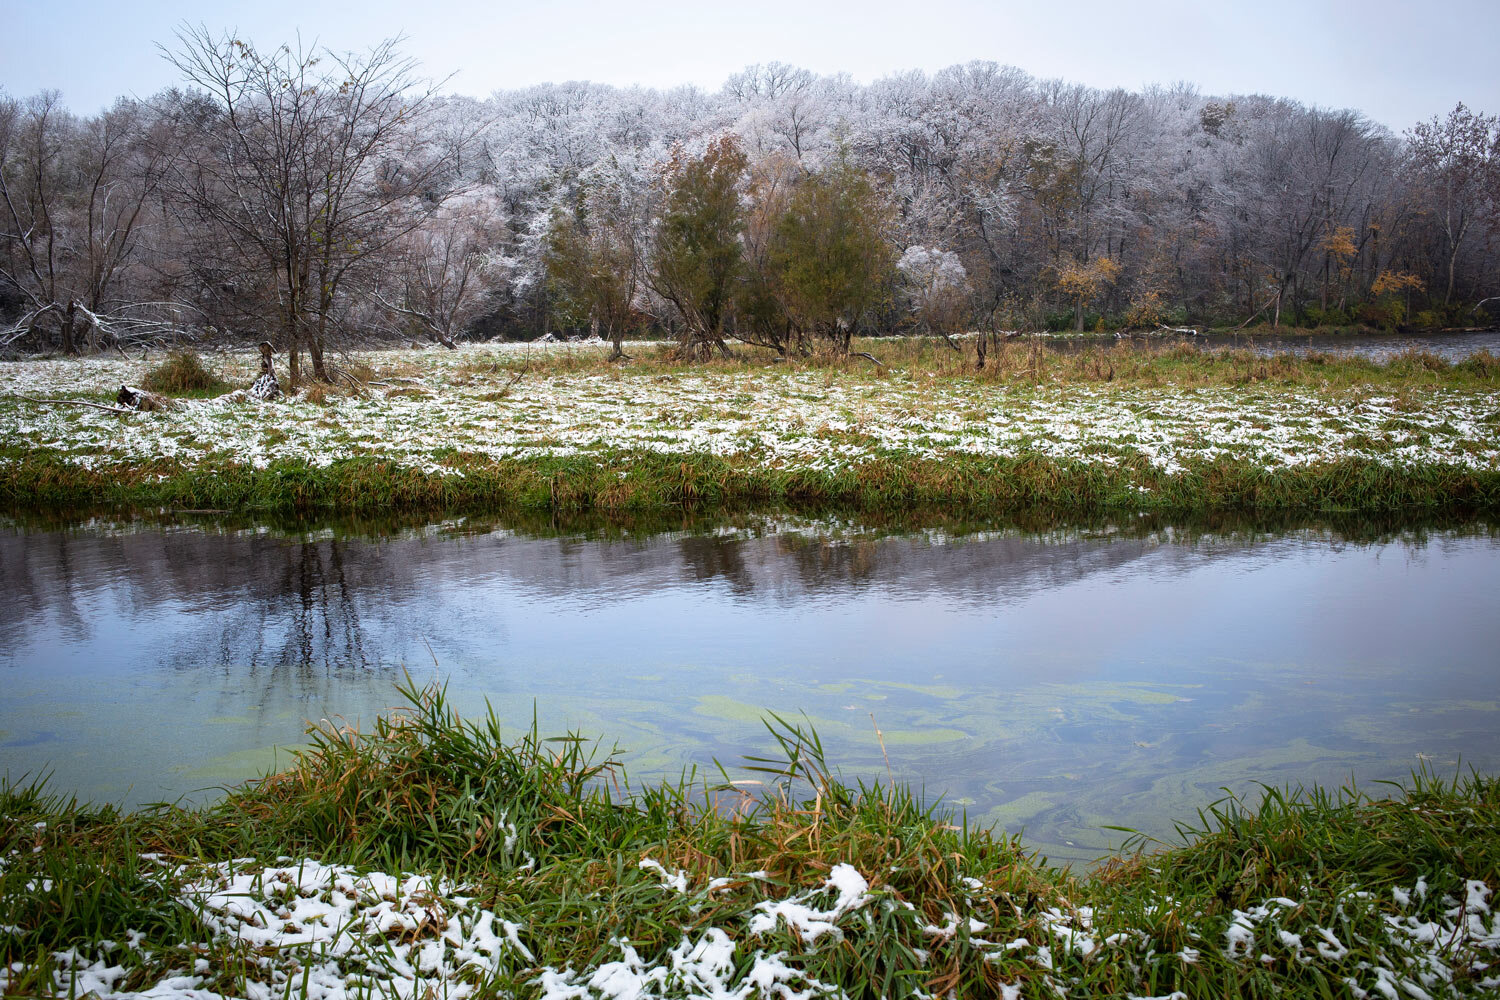  Polecat Creek near Lake Springfield flows through a snow-speckled landscape Friday, Nov. 9, 2018, in Springfield, Ill. [Rich Saal/The State Journal-Register] 